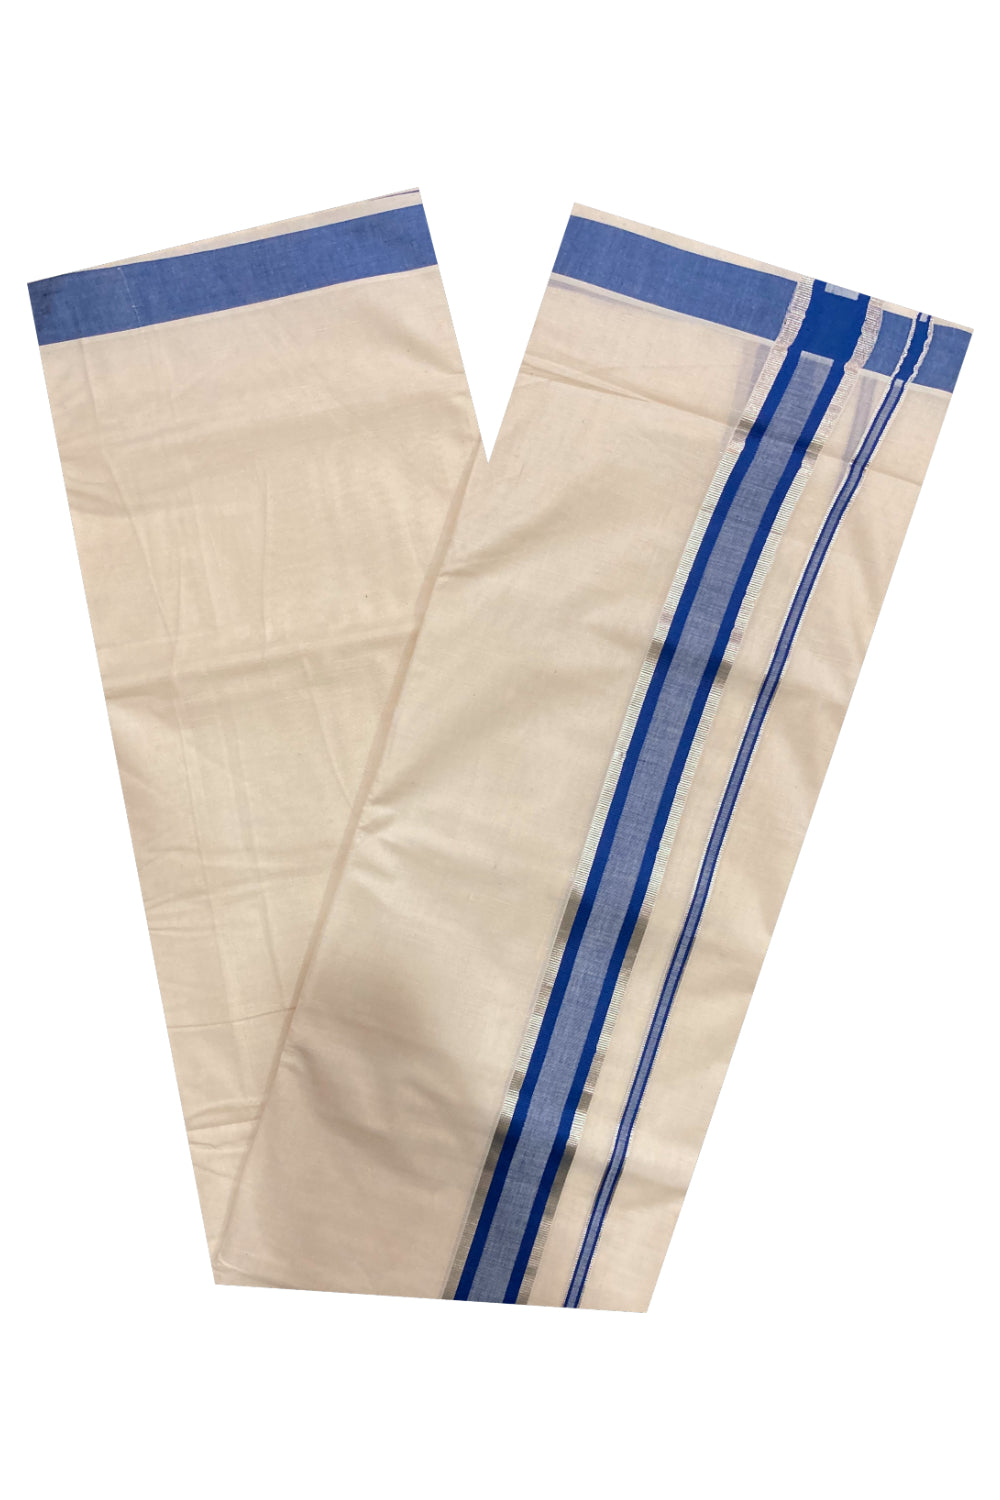 Pure Cotton Double Mundu with Blue and Silver Kasavu Border (South Indian Dhoti)